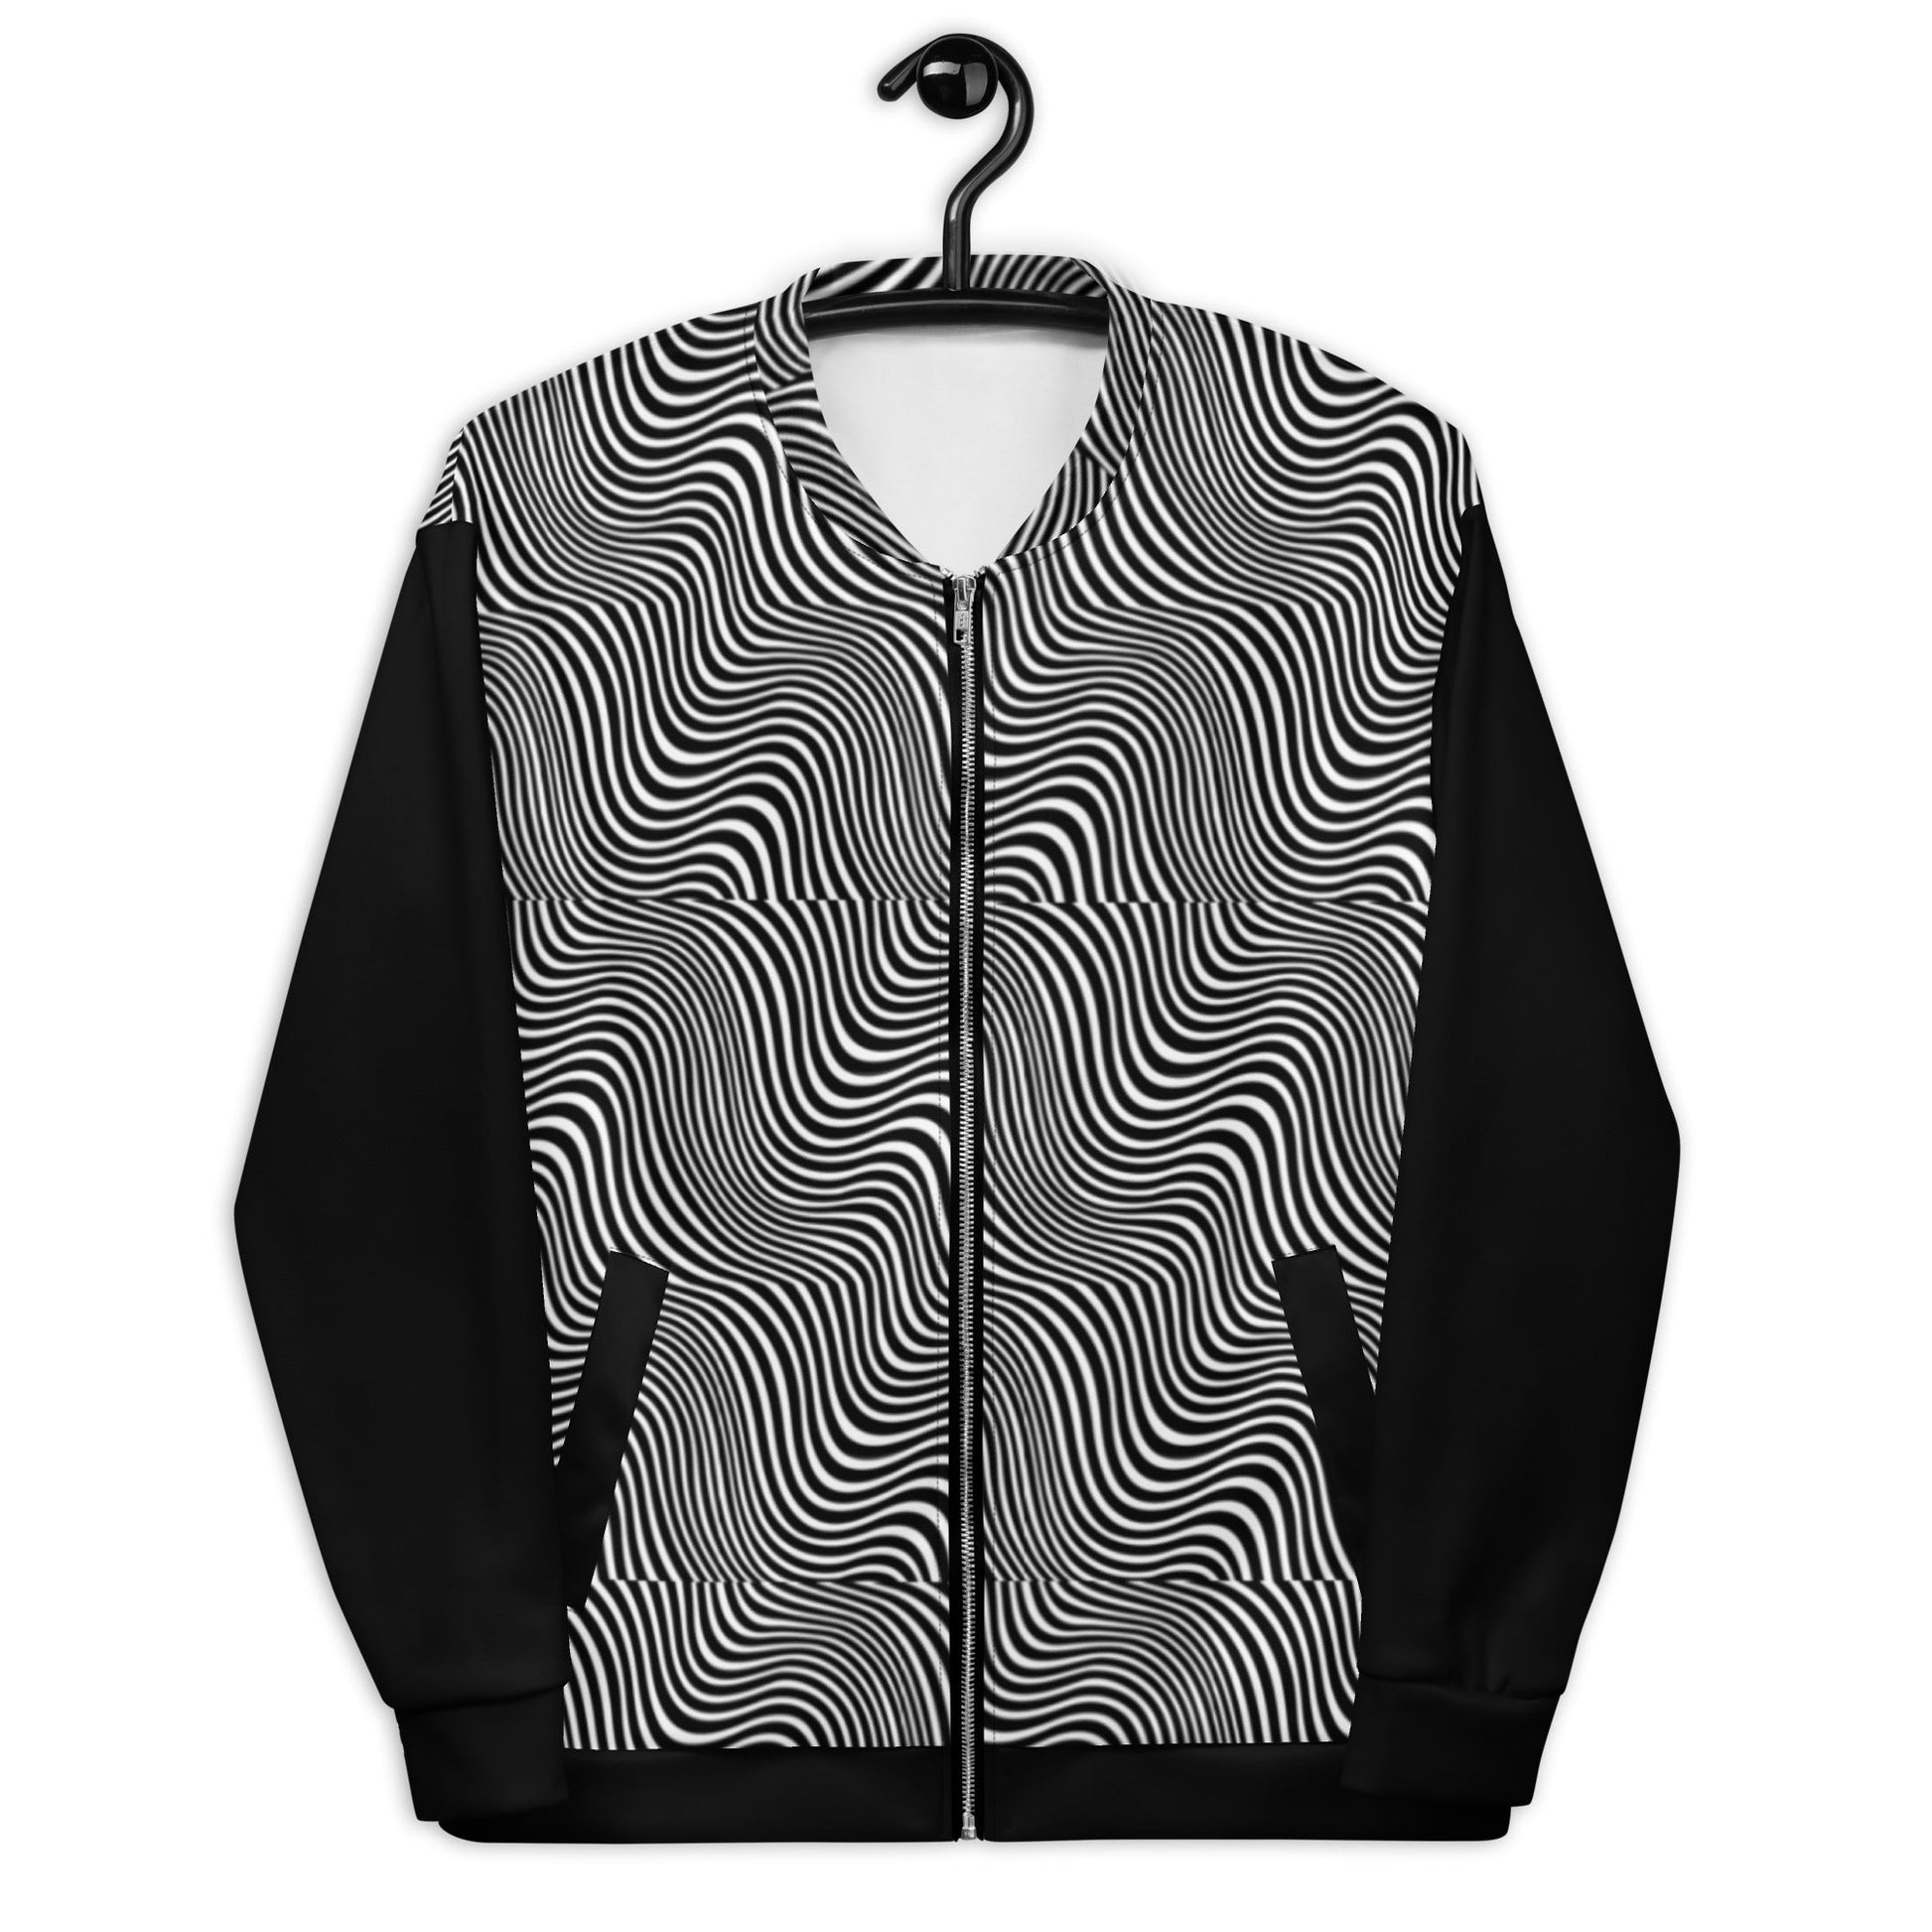 Farris Wheel Limited Trippy Unisex Bomber Jacket - BeExtra! Apparel & More